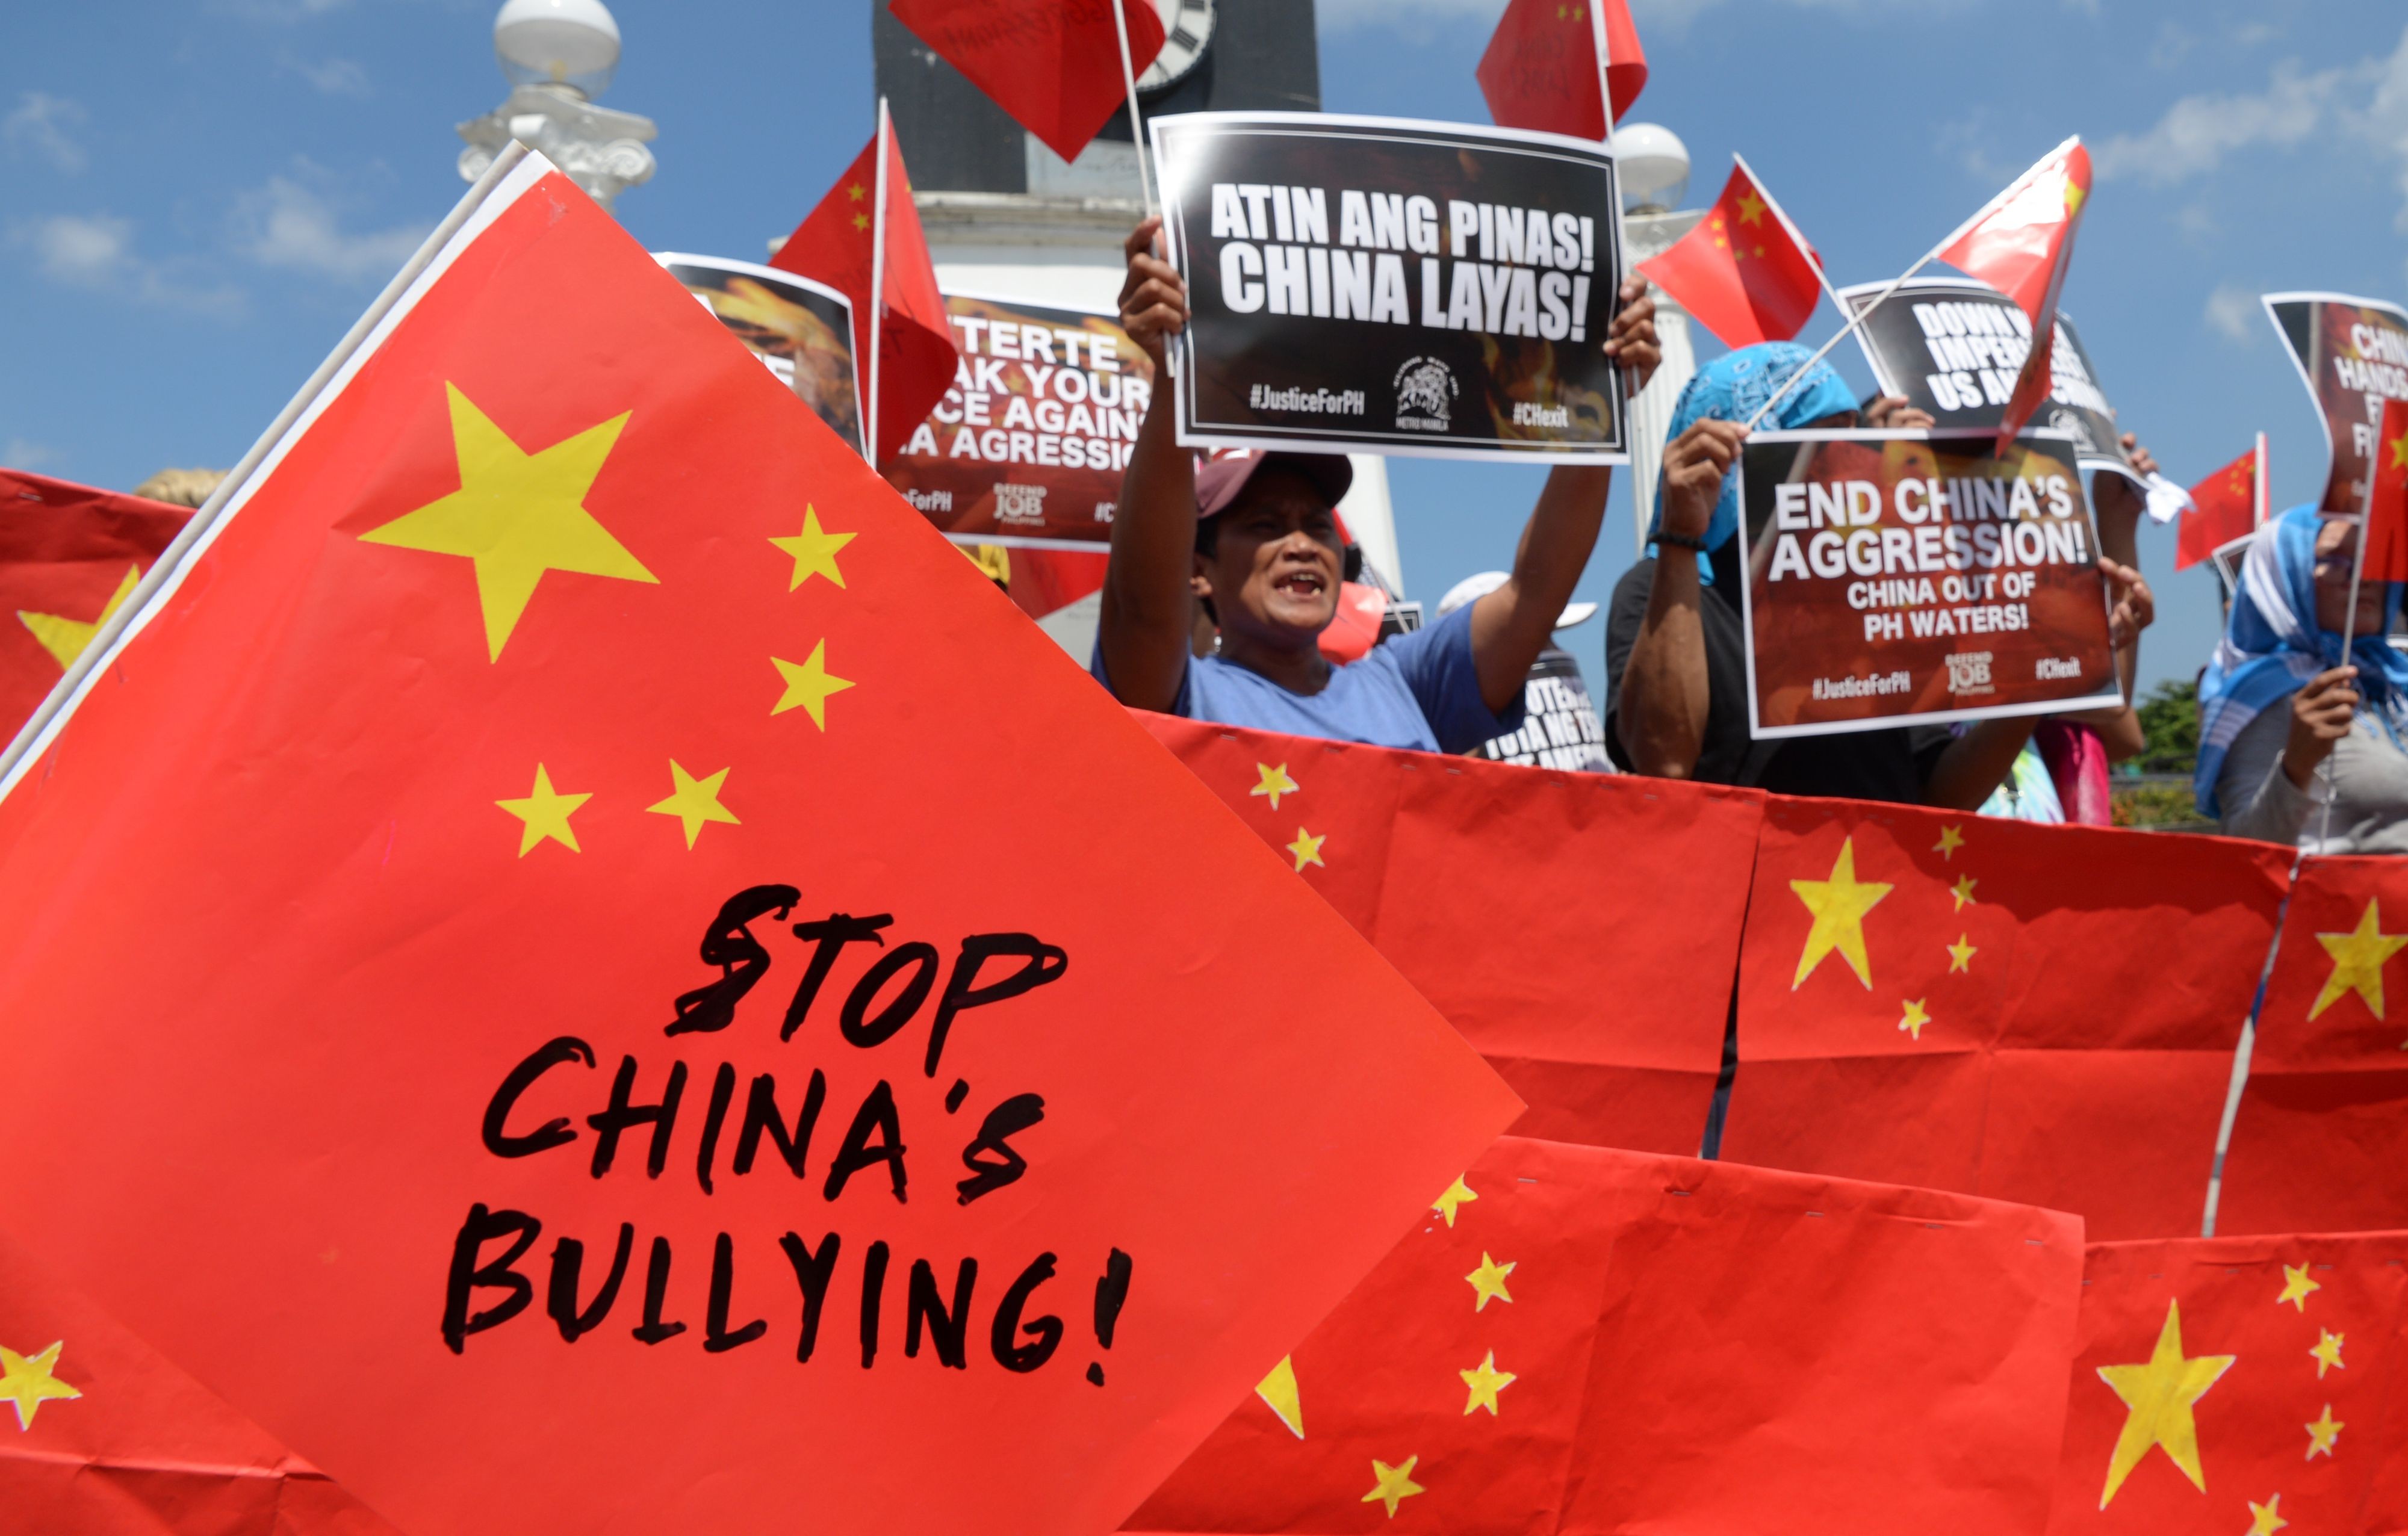 Tensions between Beijing and Manila are running high over disputes in the South China Sea. Photo: AFP